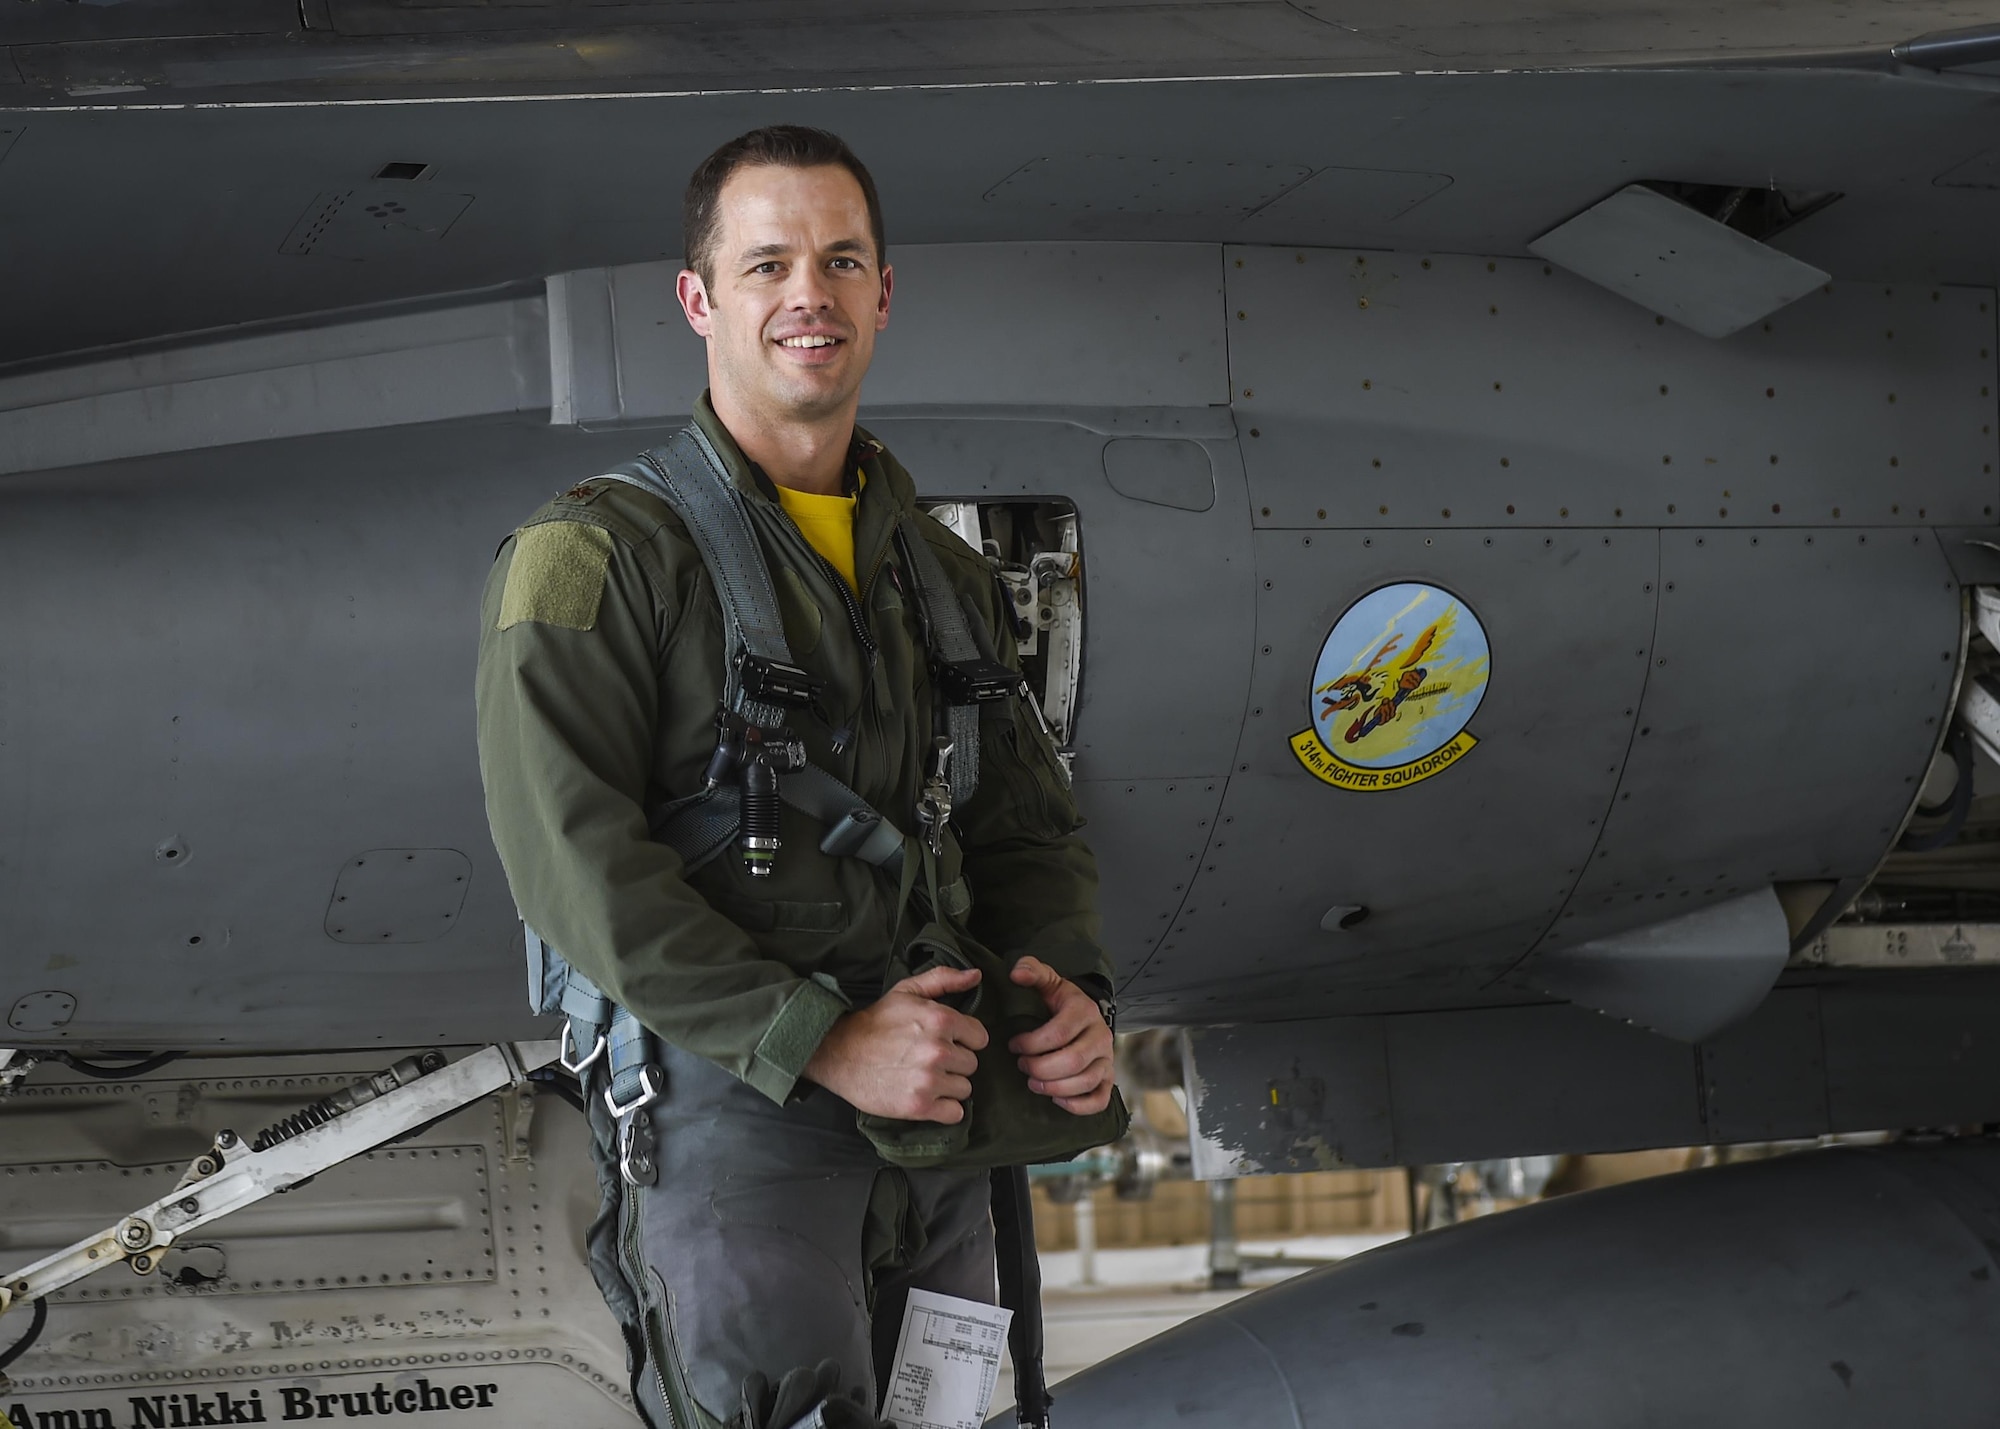 Maj. John R. Widmer, 314th Fighter Squadron flight commander and an F-16 instructor pilot, poses for a photo prior to flying in an F-16 Fighting Falcon at Holloman Air Force Base, N.M. June 23, 2017. Widmer was recently recognized as the Air Force’s Fighter Instructor Pilot of the Year for his exemplary performance in and out of the jet. (U.S. Air Force photo by Airman 1st Class Alexis Docherty)